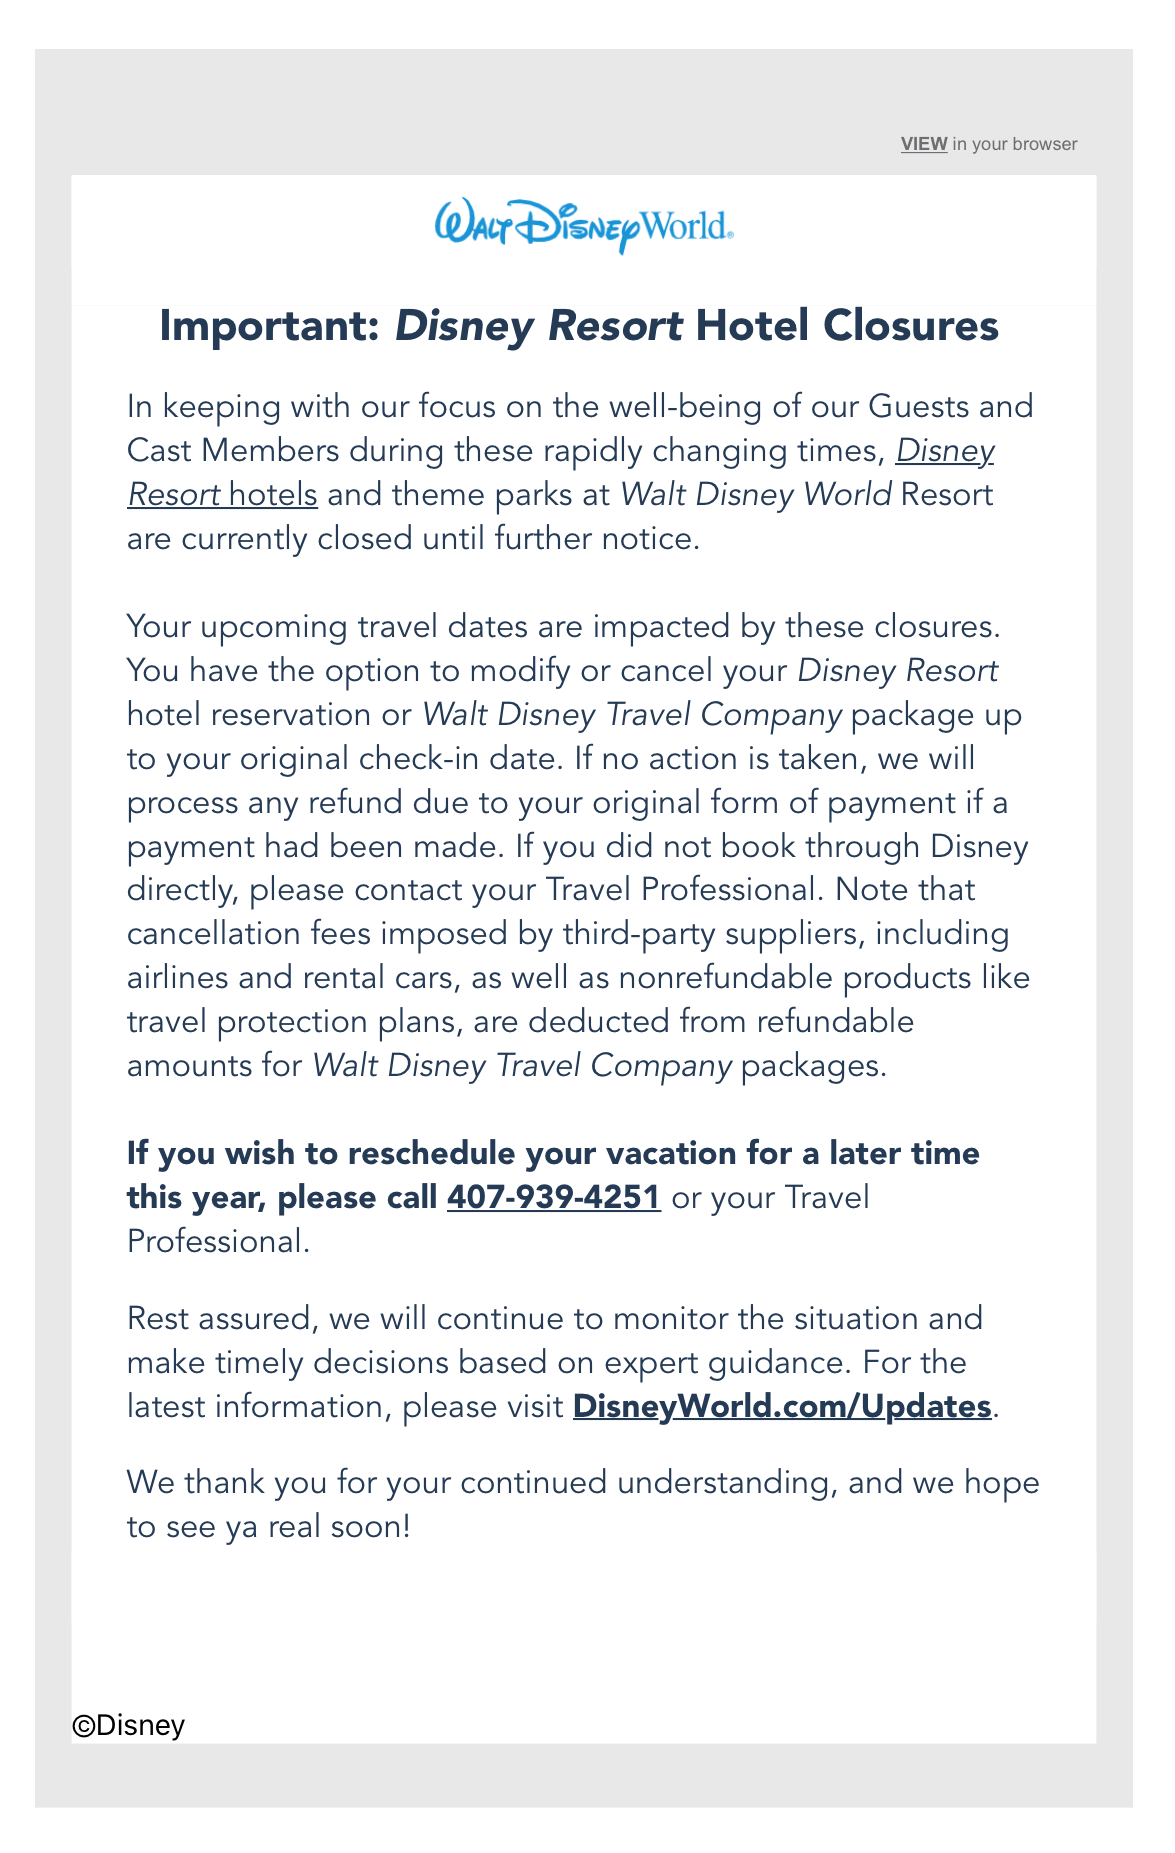 Walt Disney World Resort Cancelling Reservations Through June 13 Due to